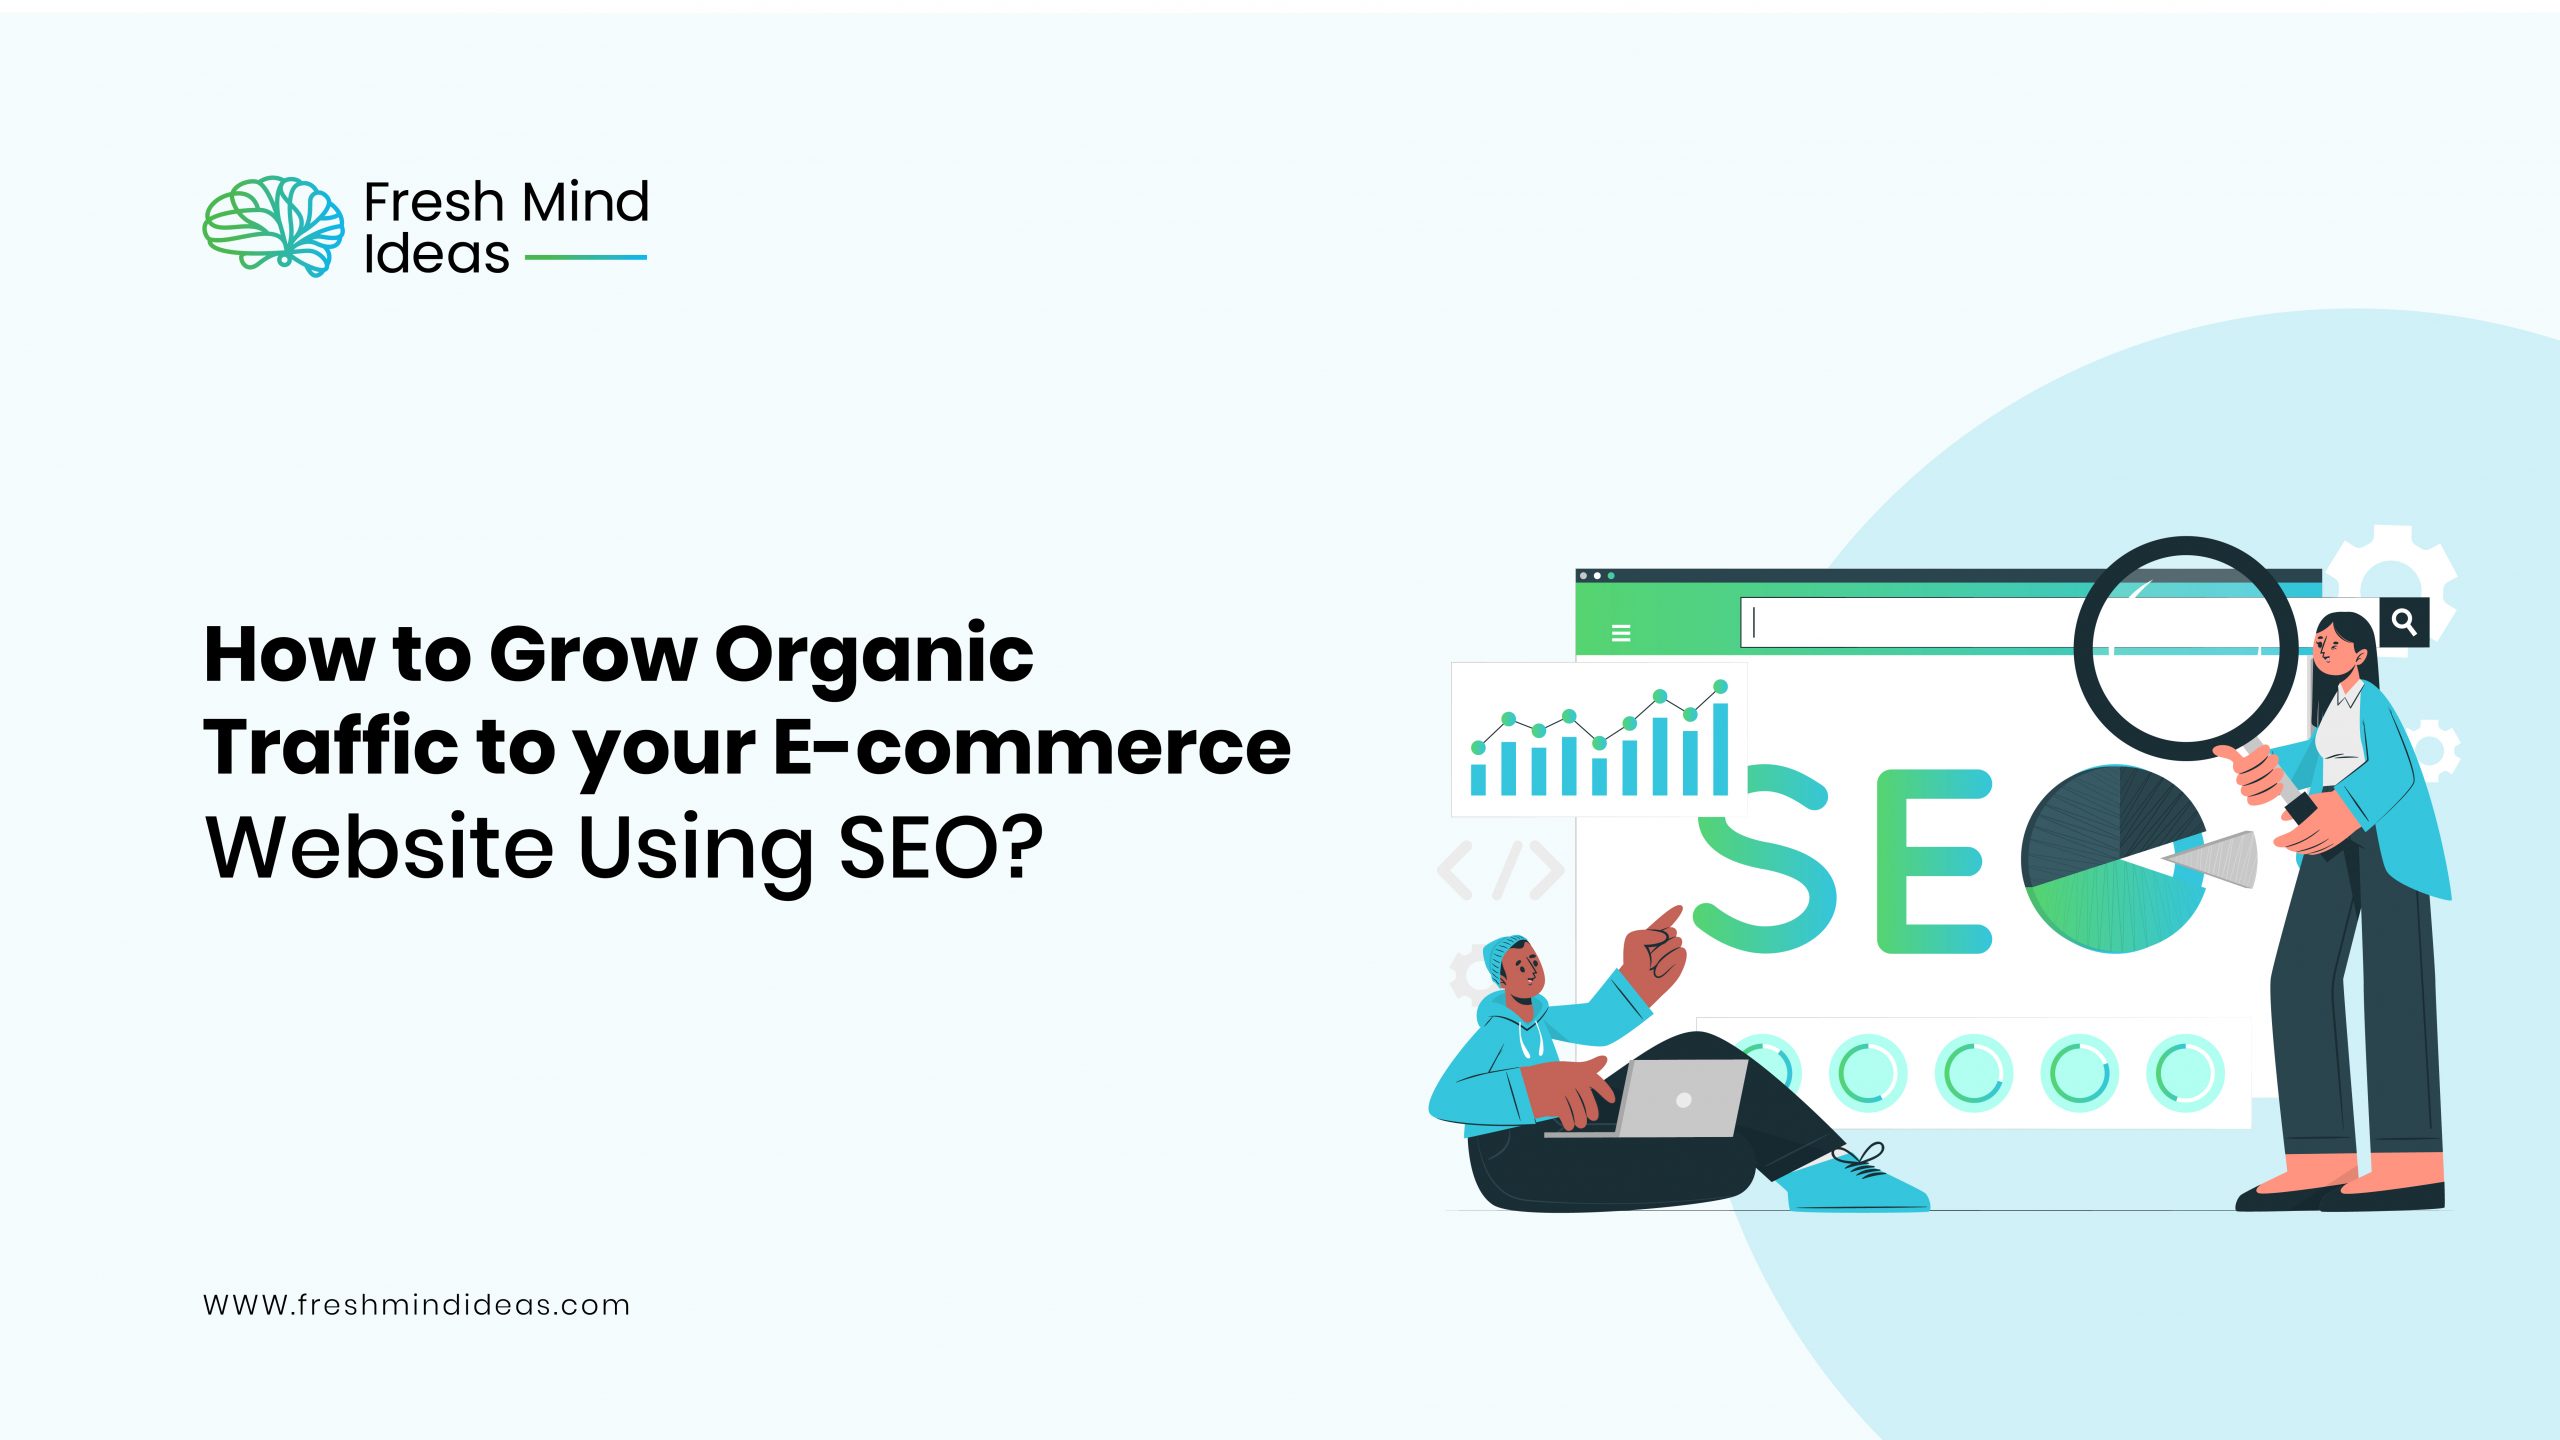 How to Grow Organic Traffic to your Website Using SEO?